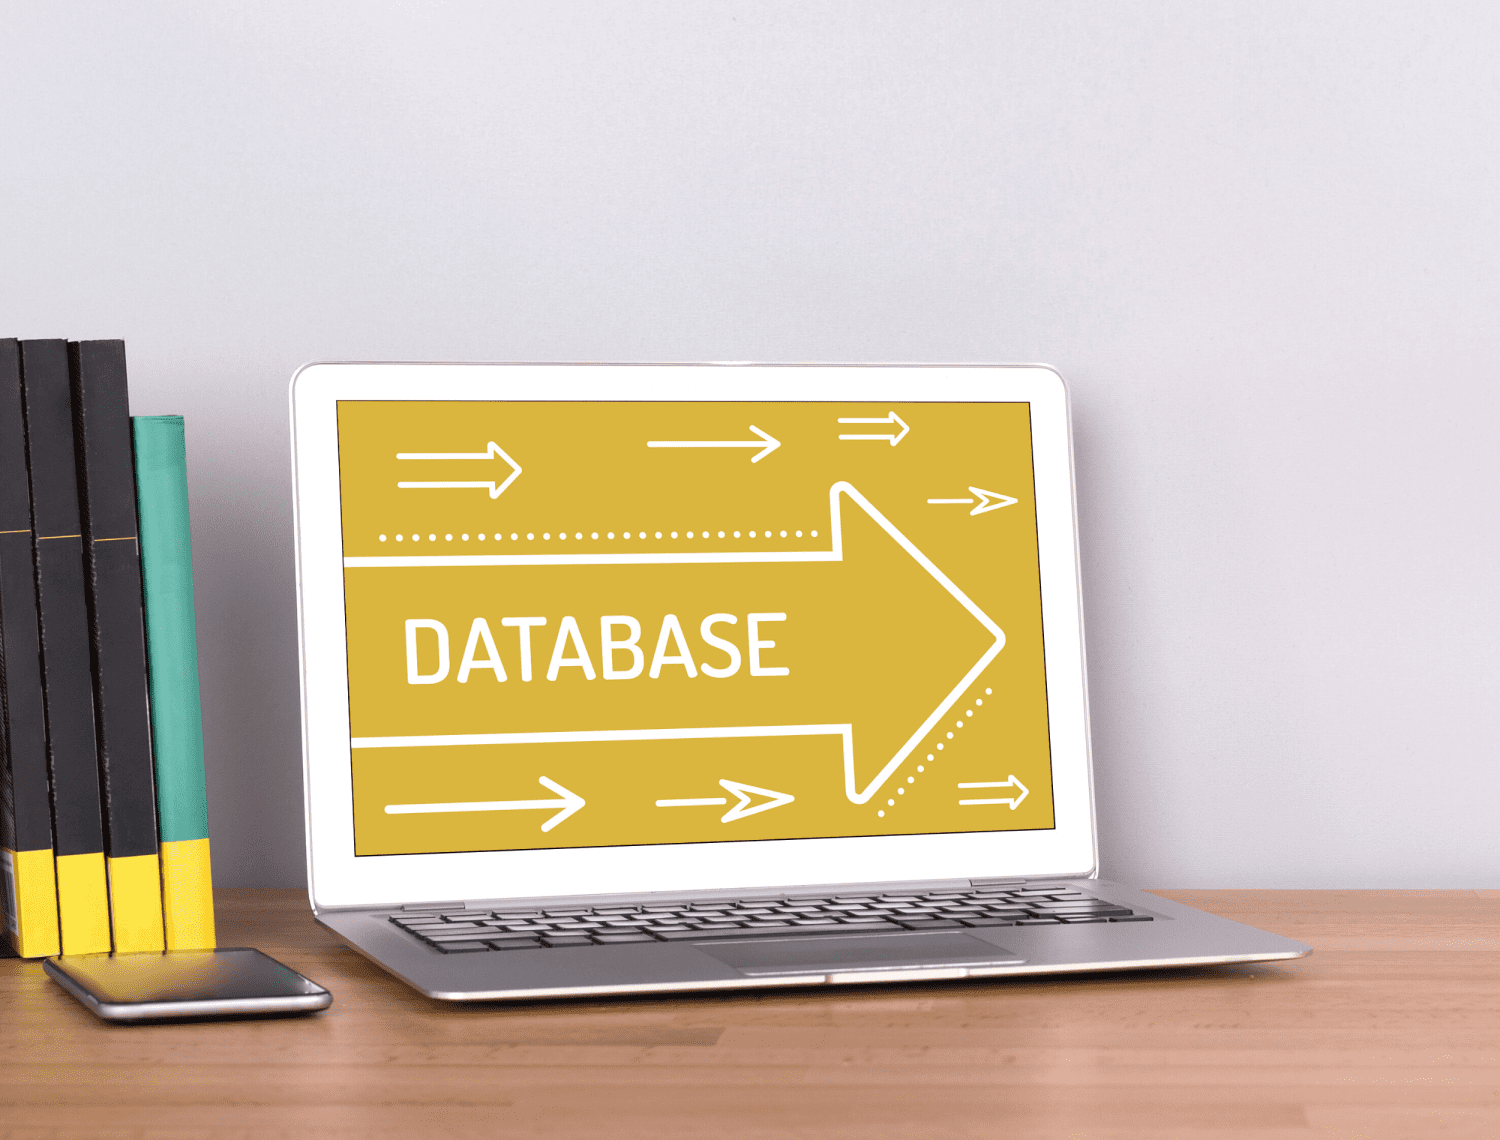 Getting the most out of your database